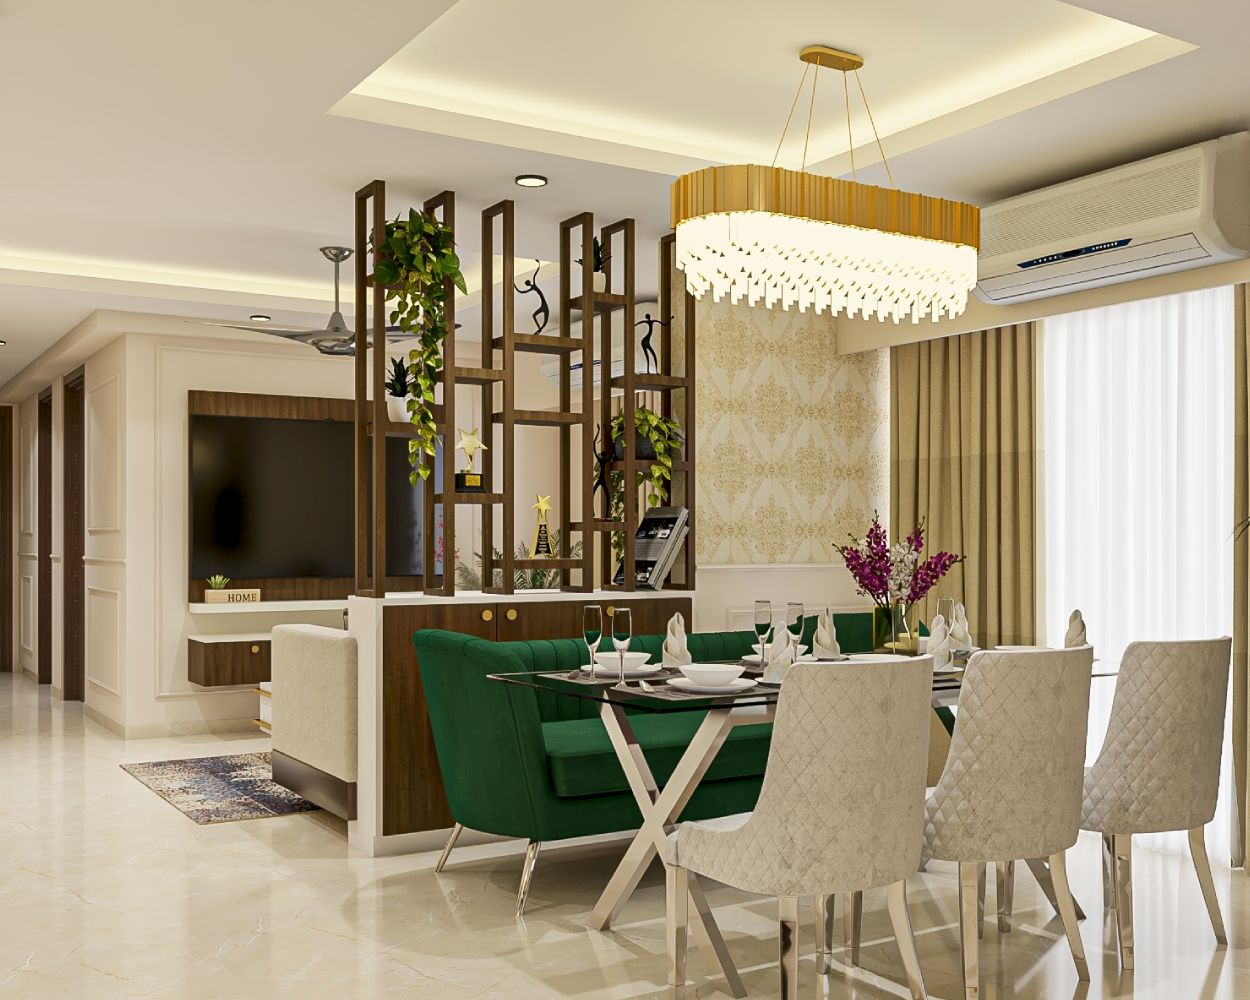 Contemporary White And Green Dining Room Design With Overhead Chandelier